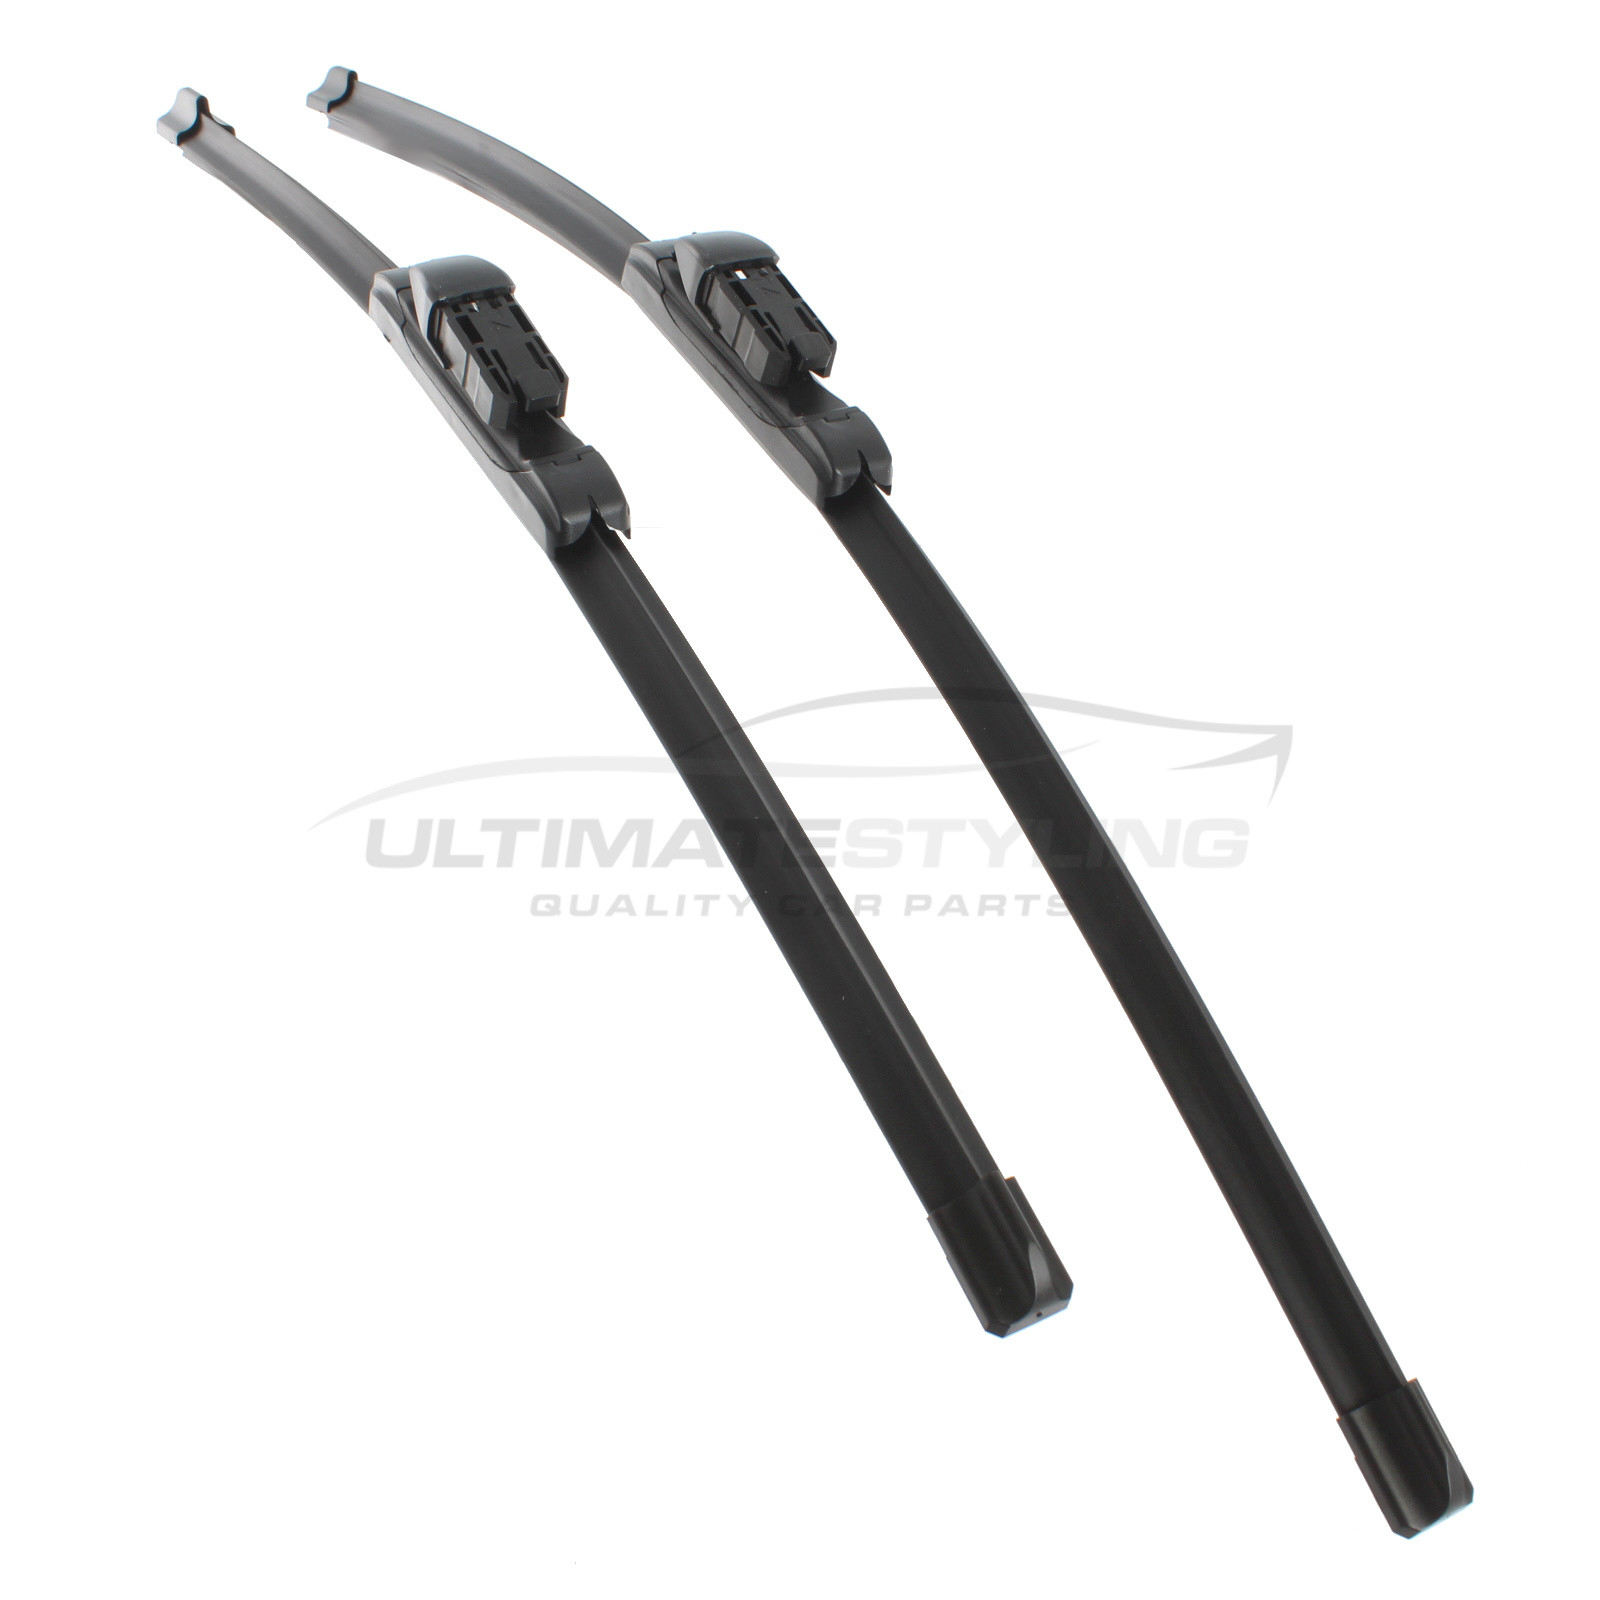 Drivers Side & Passenger Side (Front) Wiper Blades for VW Jetta